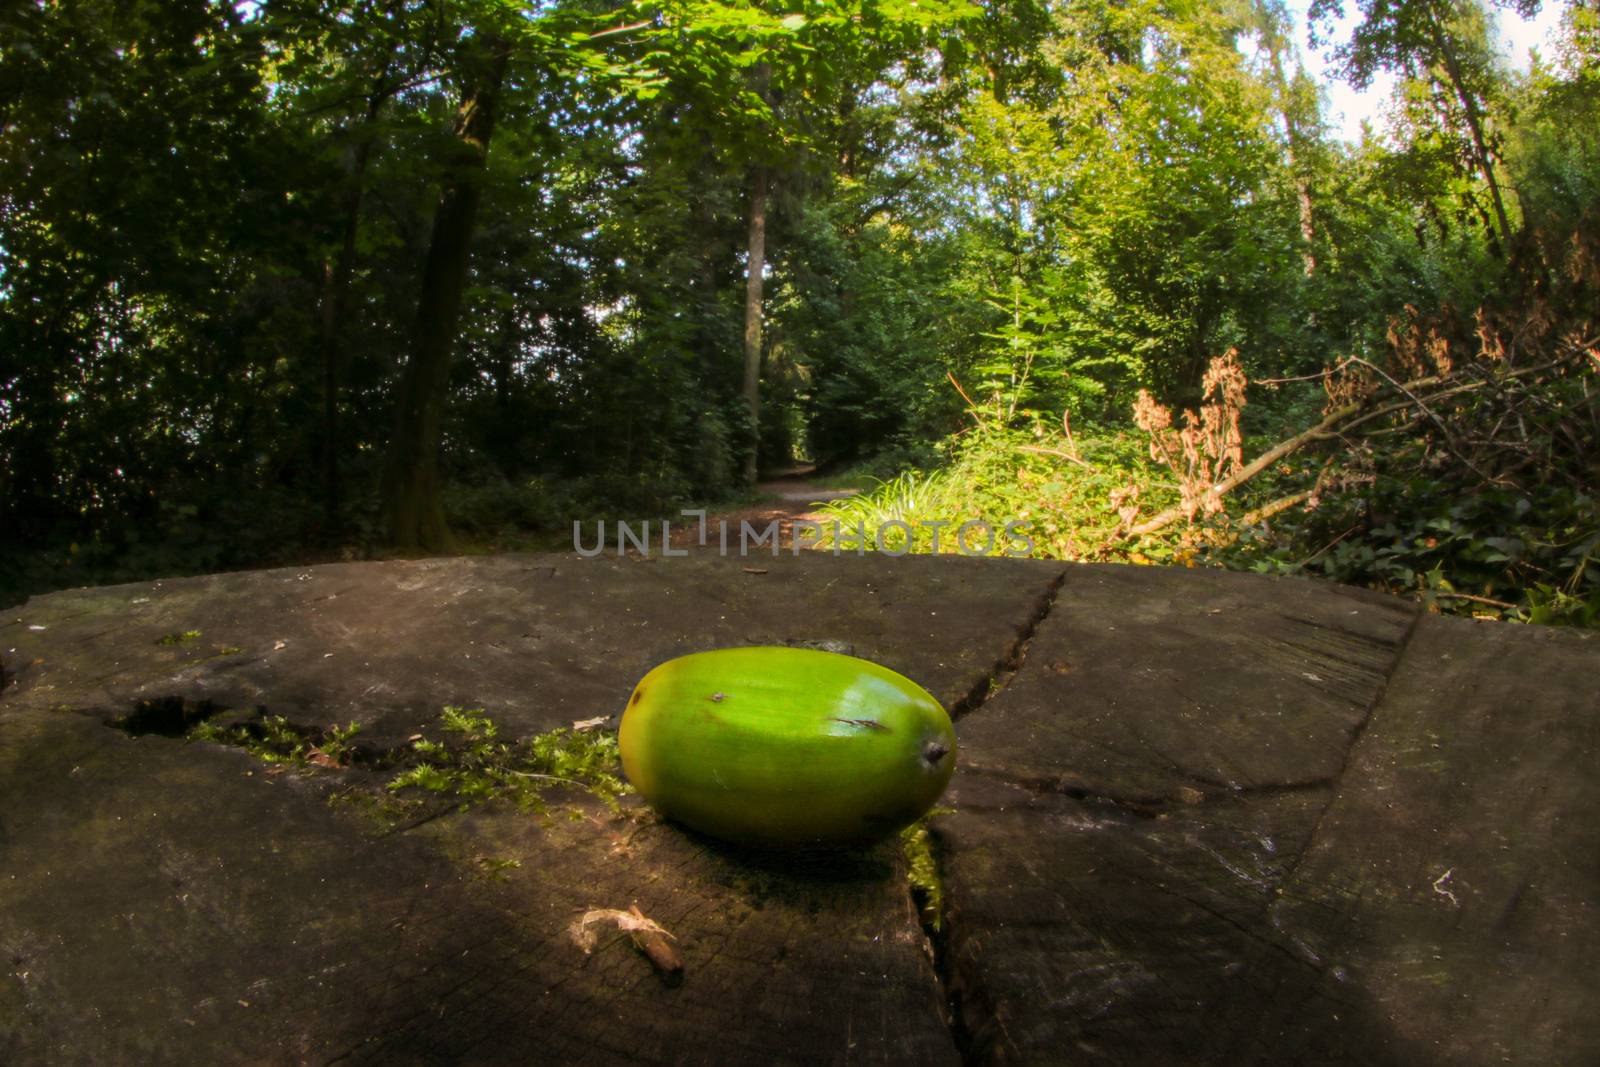 Acorn in forrest shot with a fish eye lenses